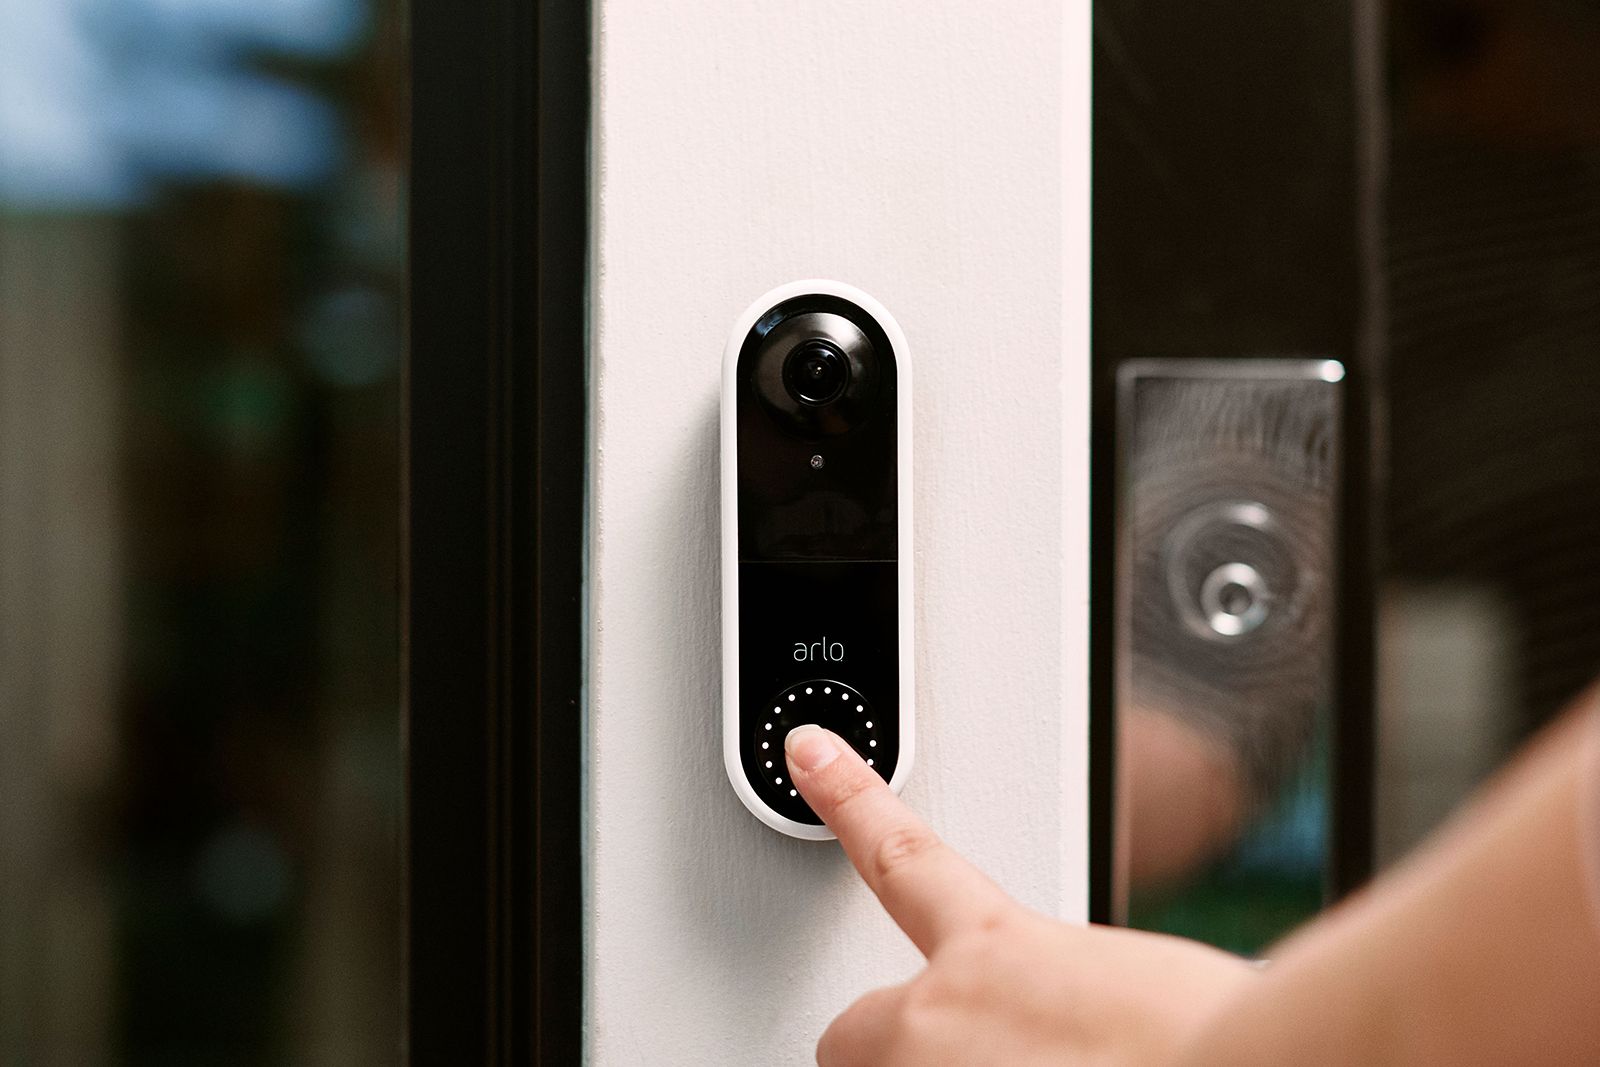 Arlo Video Doorbell is a serious competitor to Ring image 1